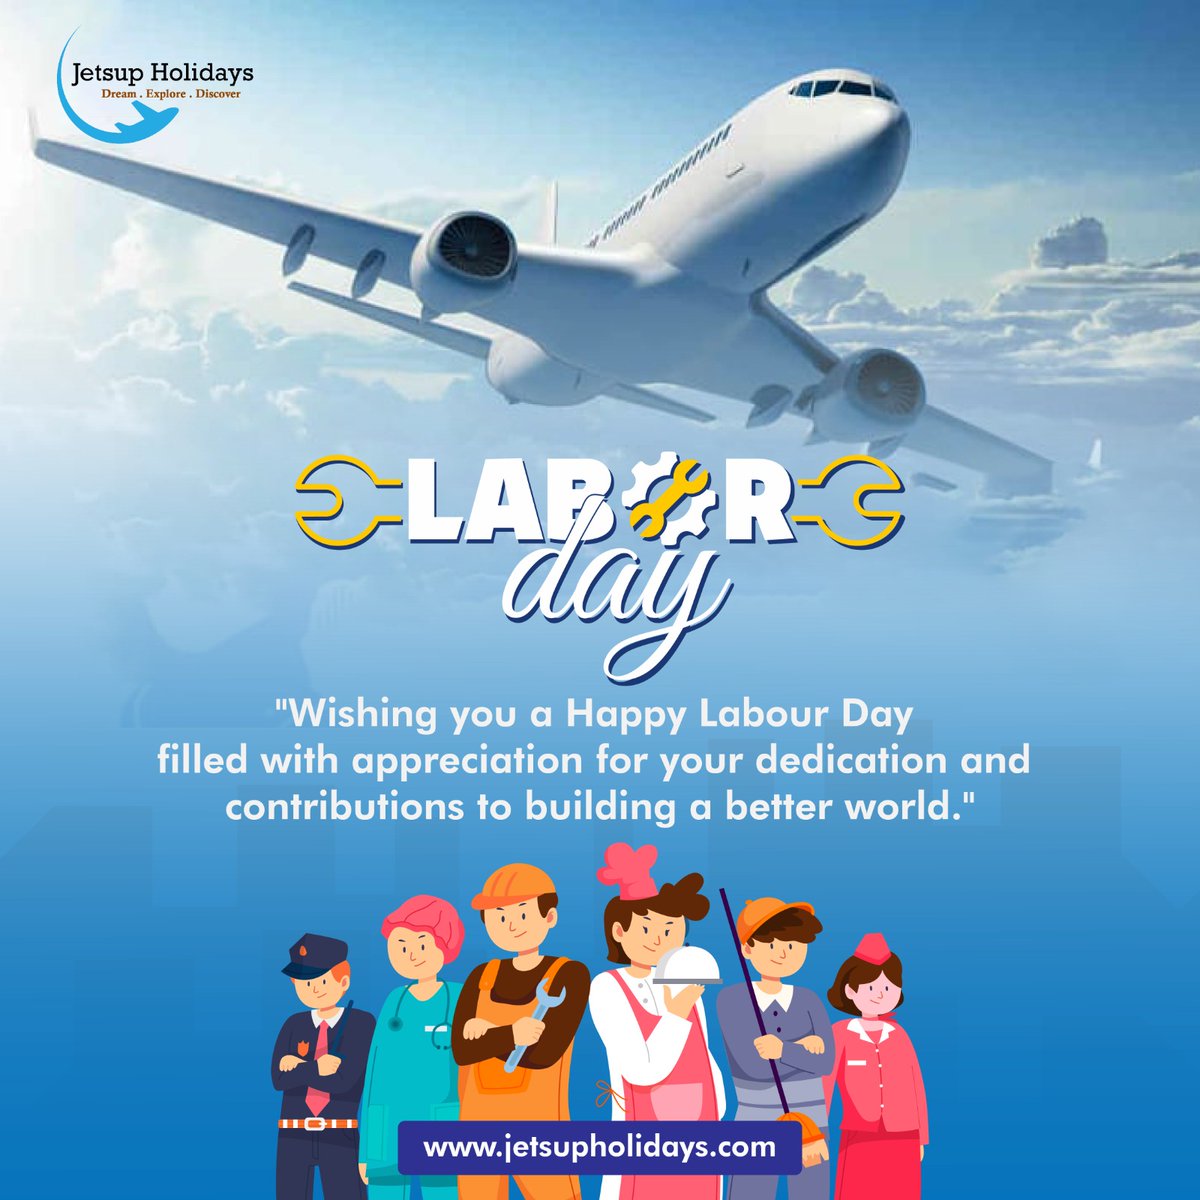 'Wishing you a Happy Labour Day filled with appreciation for your dedication and contributions to building a better world.'

#LabourDayHeroes #WorkforceAppreciation #BuildingTomorrow #HardWorkPaysOff #LaborDayGratitude #WorkersRock #jetsupholidays